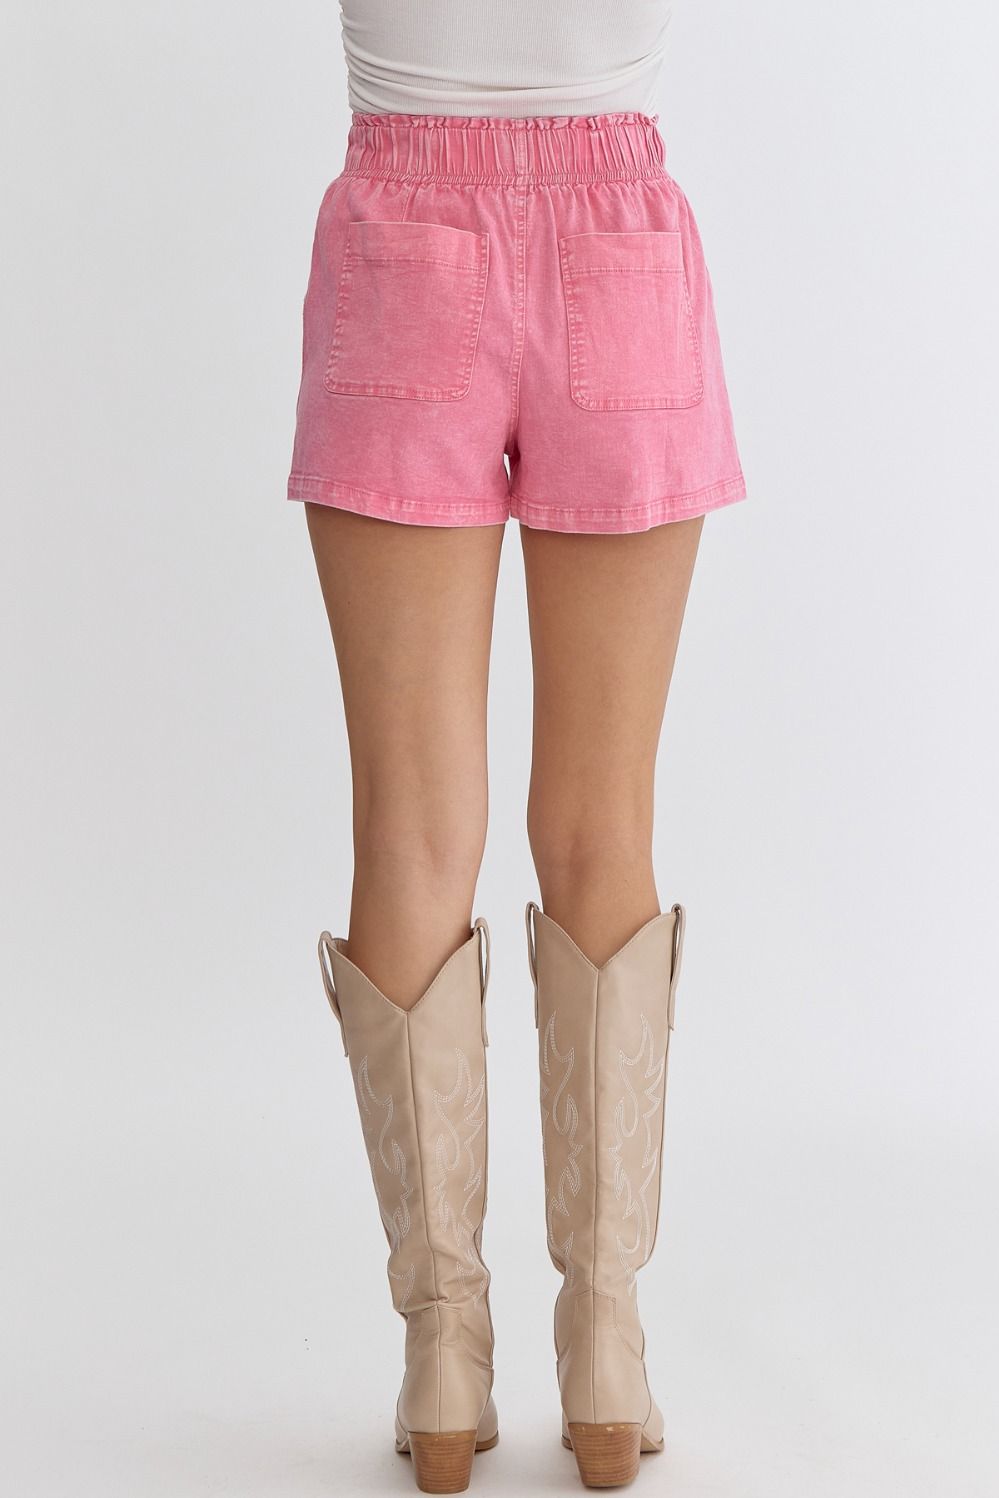 Casual Times Elastic High Waist Shorts in Pink